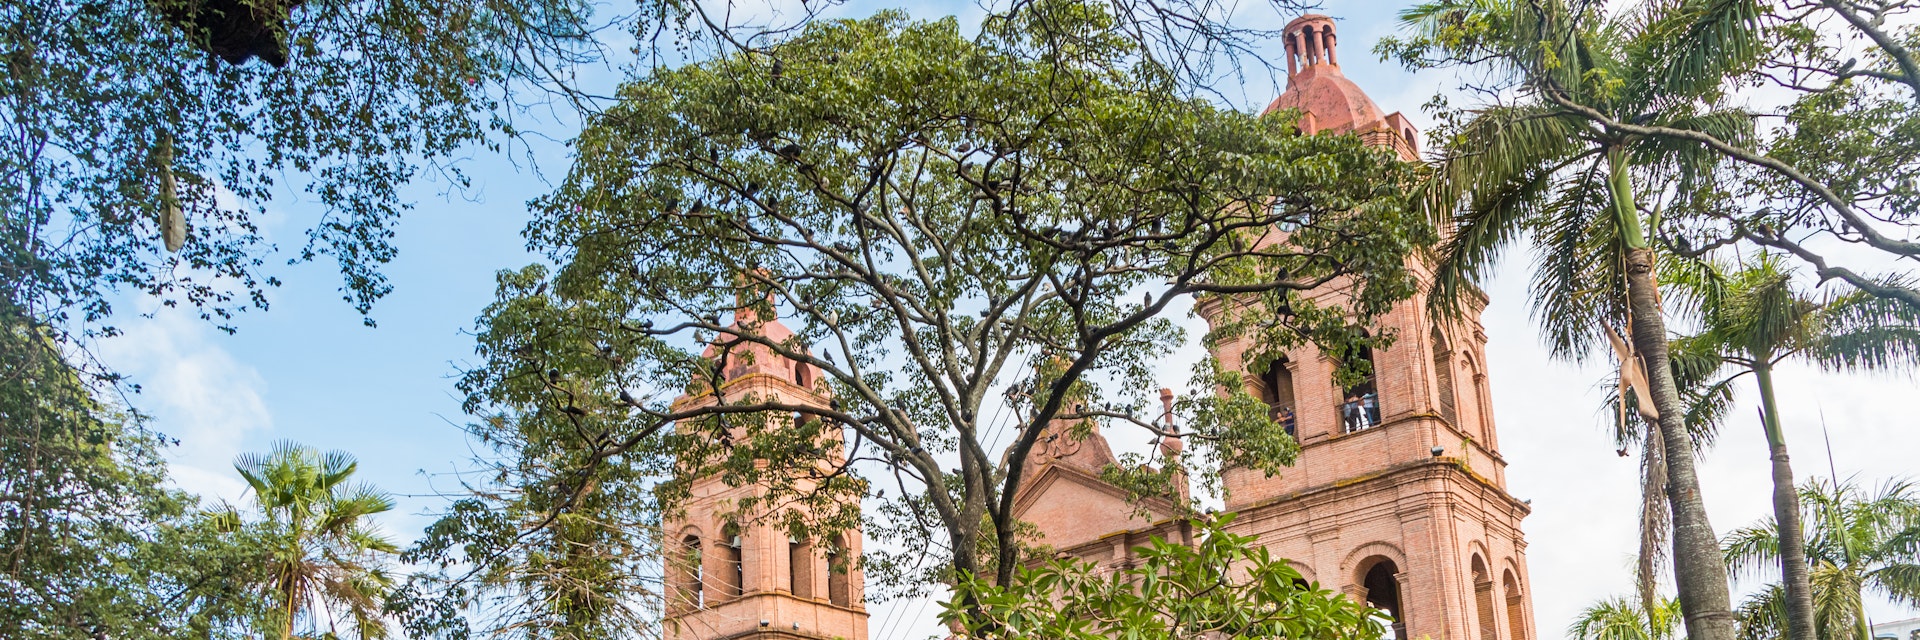 People relax in front of the Cathedral Basilica of St Lawrence in Santa Cruz, Bolivia